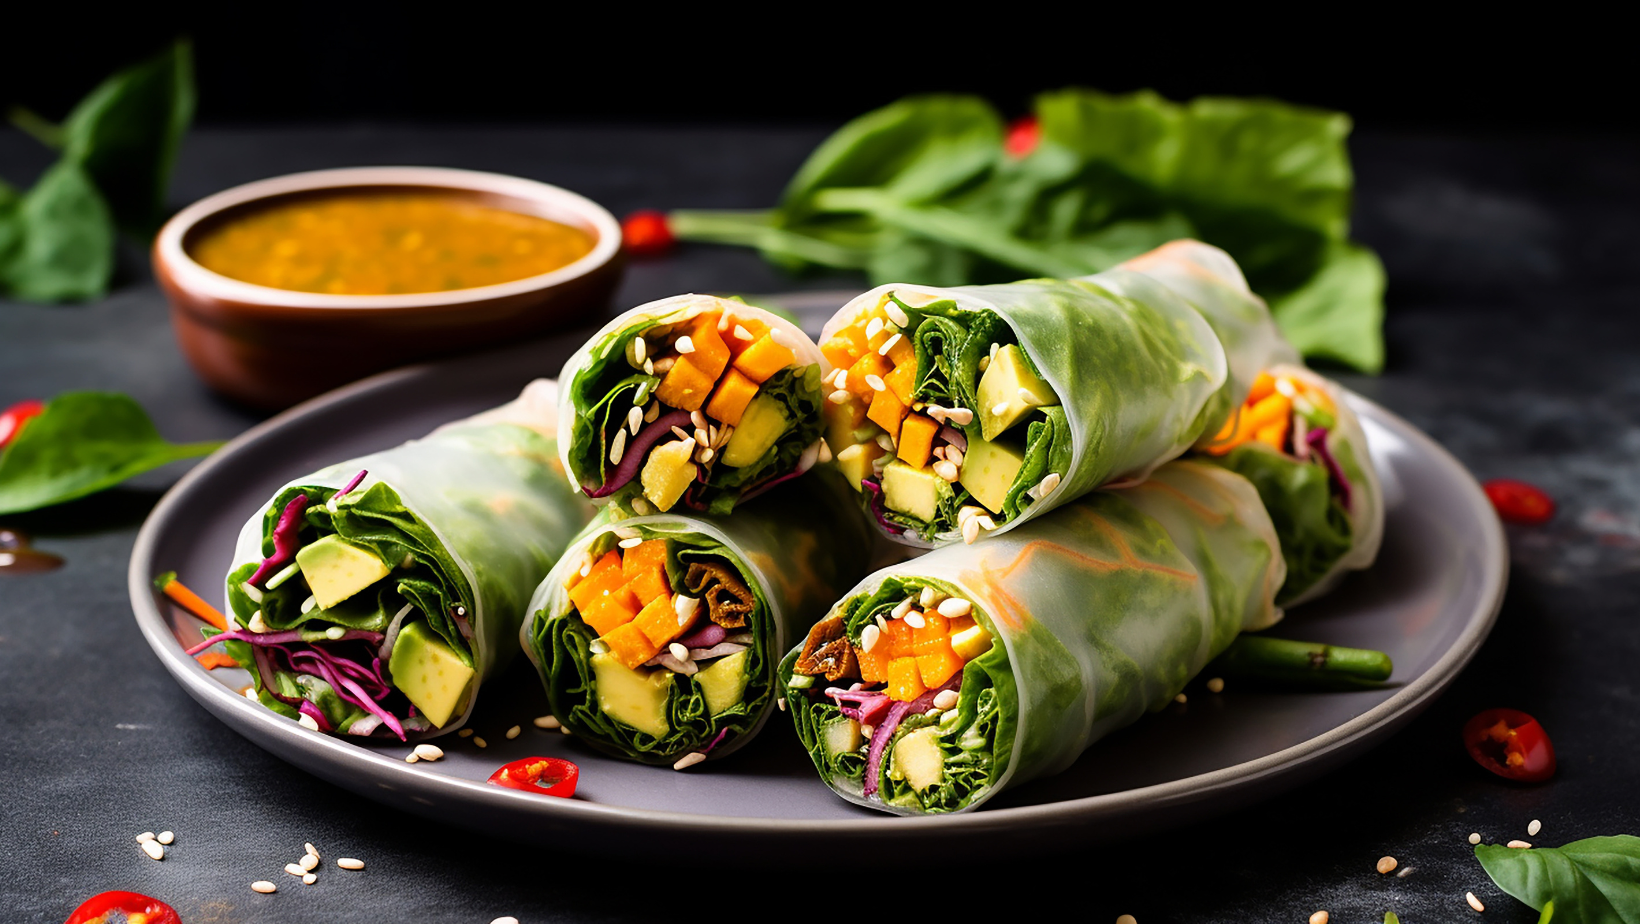 mouthwatering avocado veggies spring rolls, served with a tantalizingly sweet Thai mango sauce—perfect for a fresh and flavorful delight